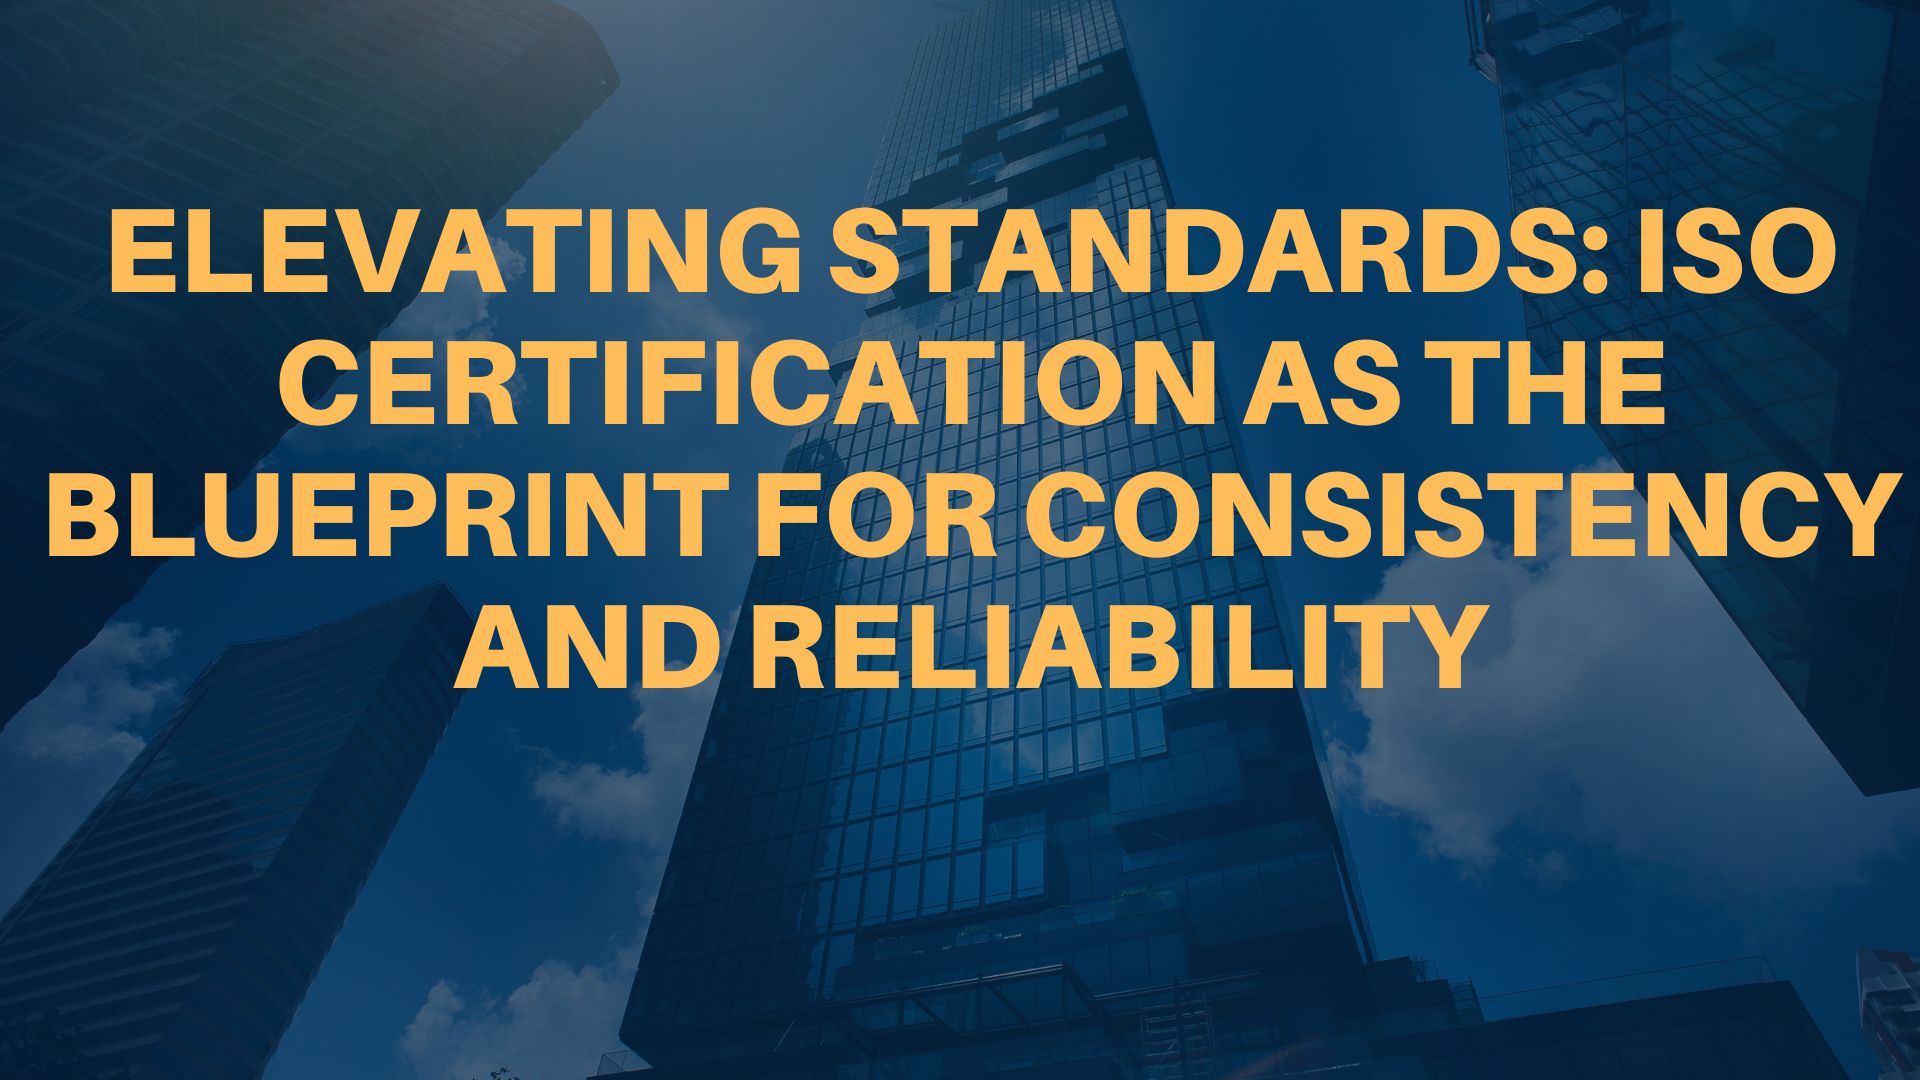 Elevating Standards: ISO Certification as the Blueprint for Consistency and Reliability